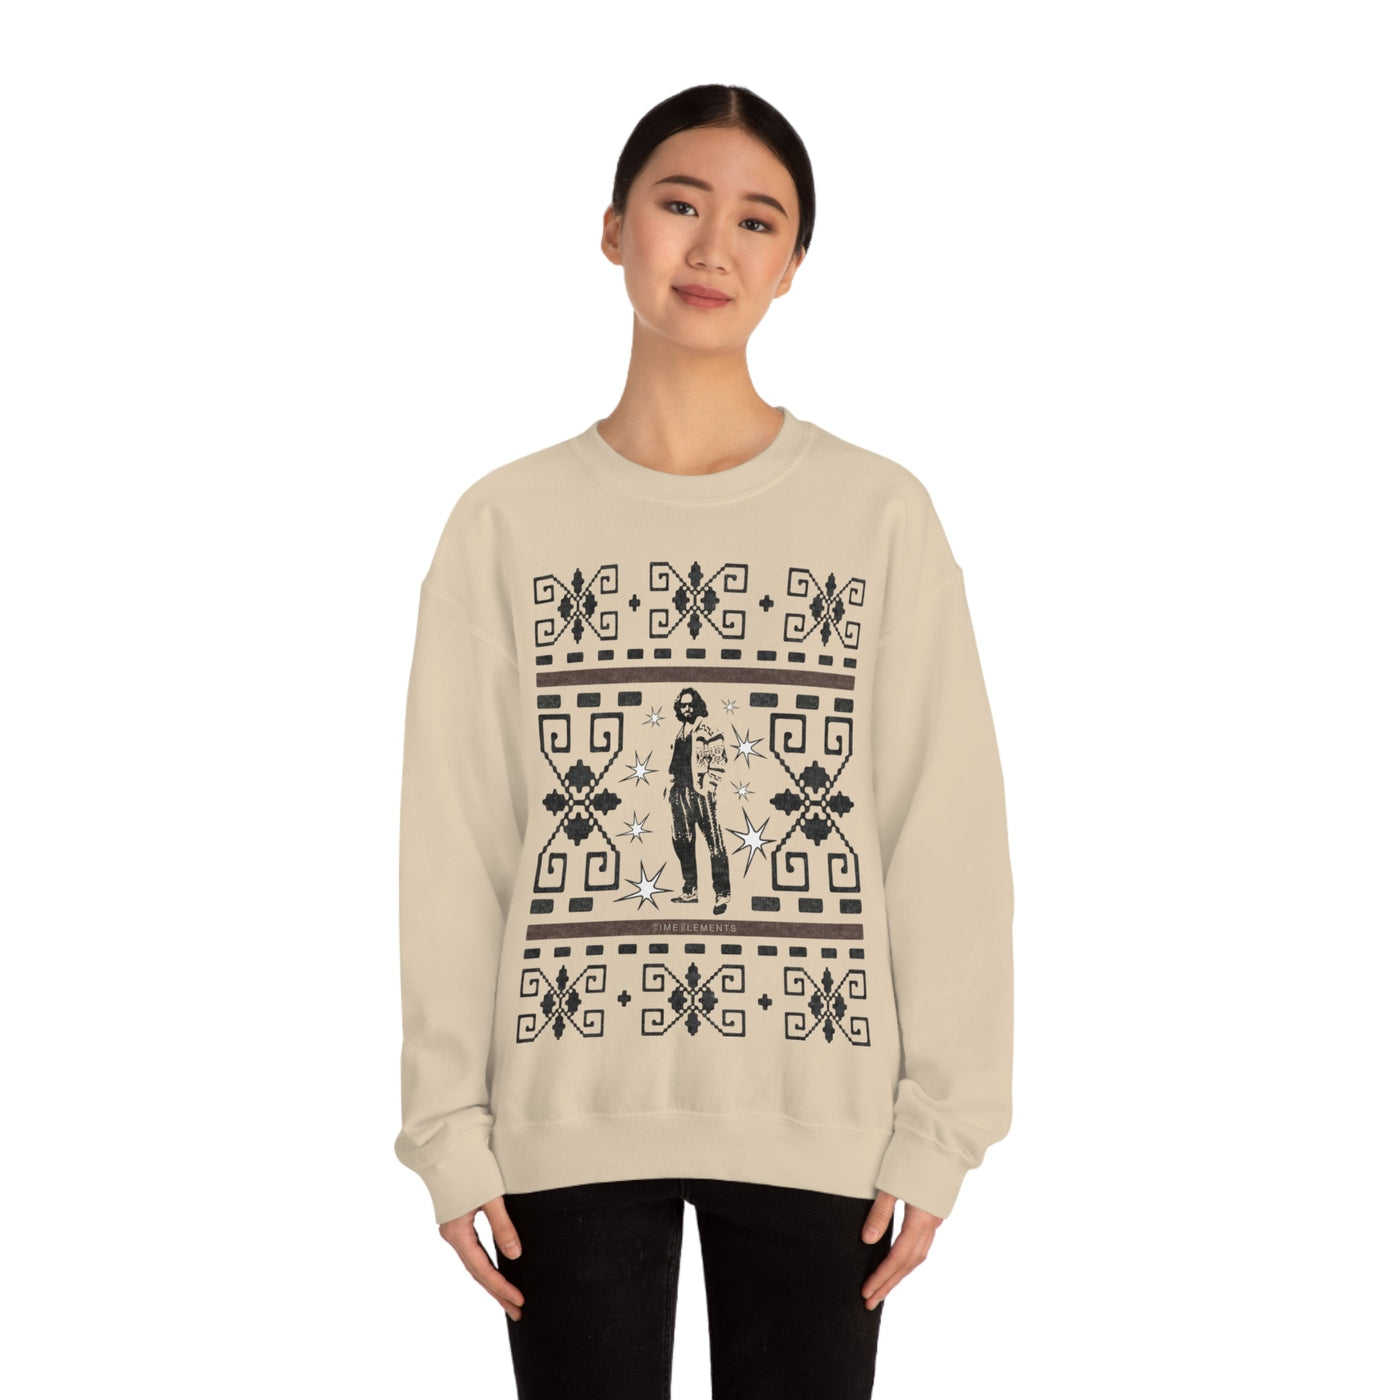 The Dude's Sweatshirt with The Iconic Lebowski Sweater Pattern and The Dude's Silhouette